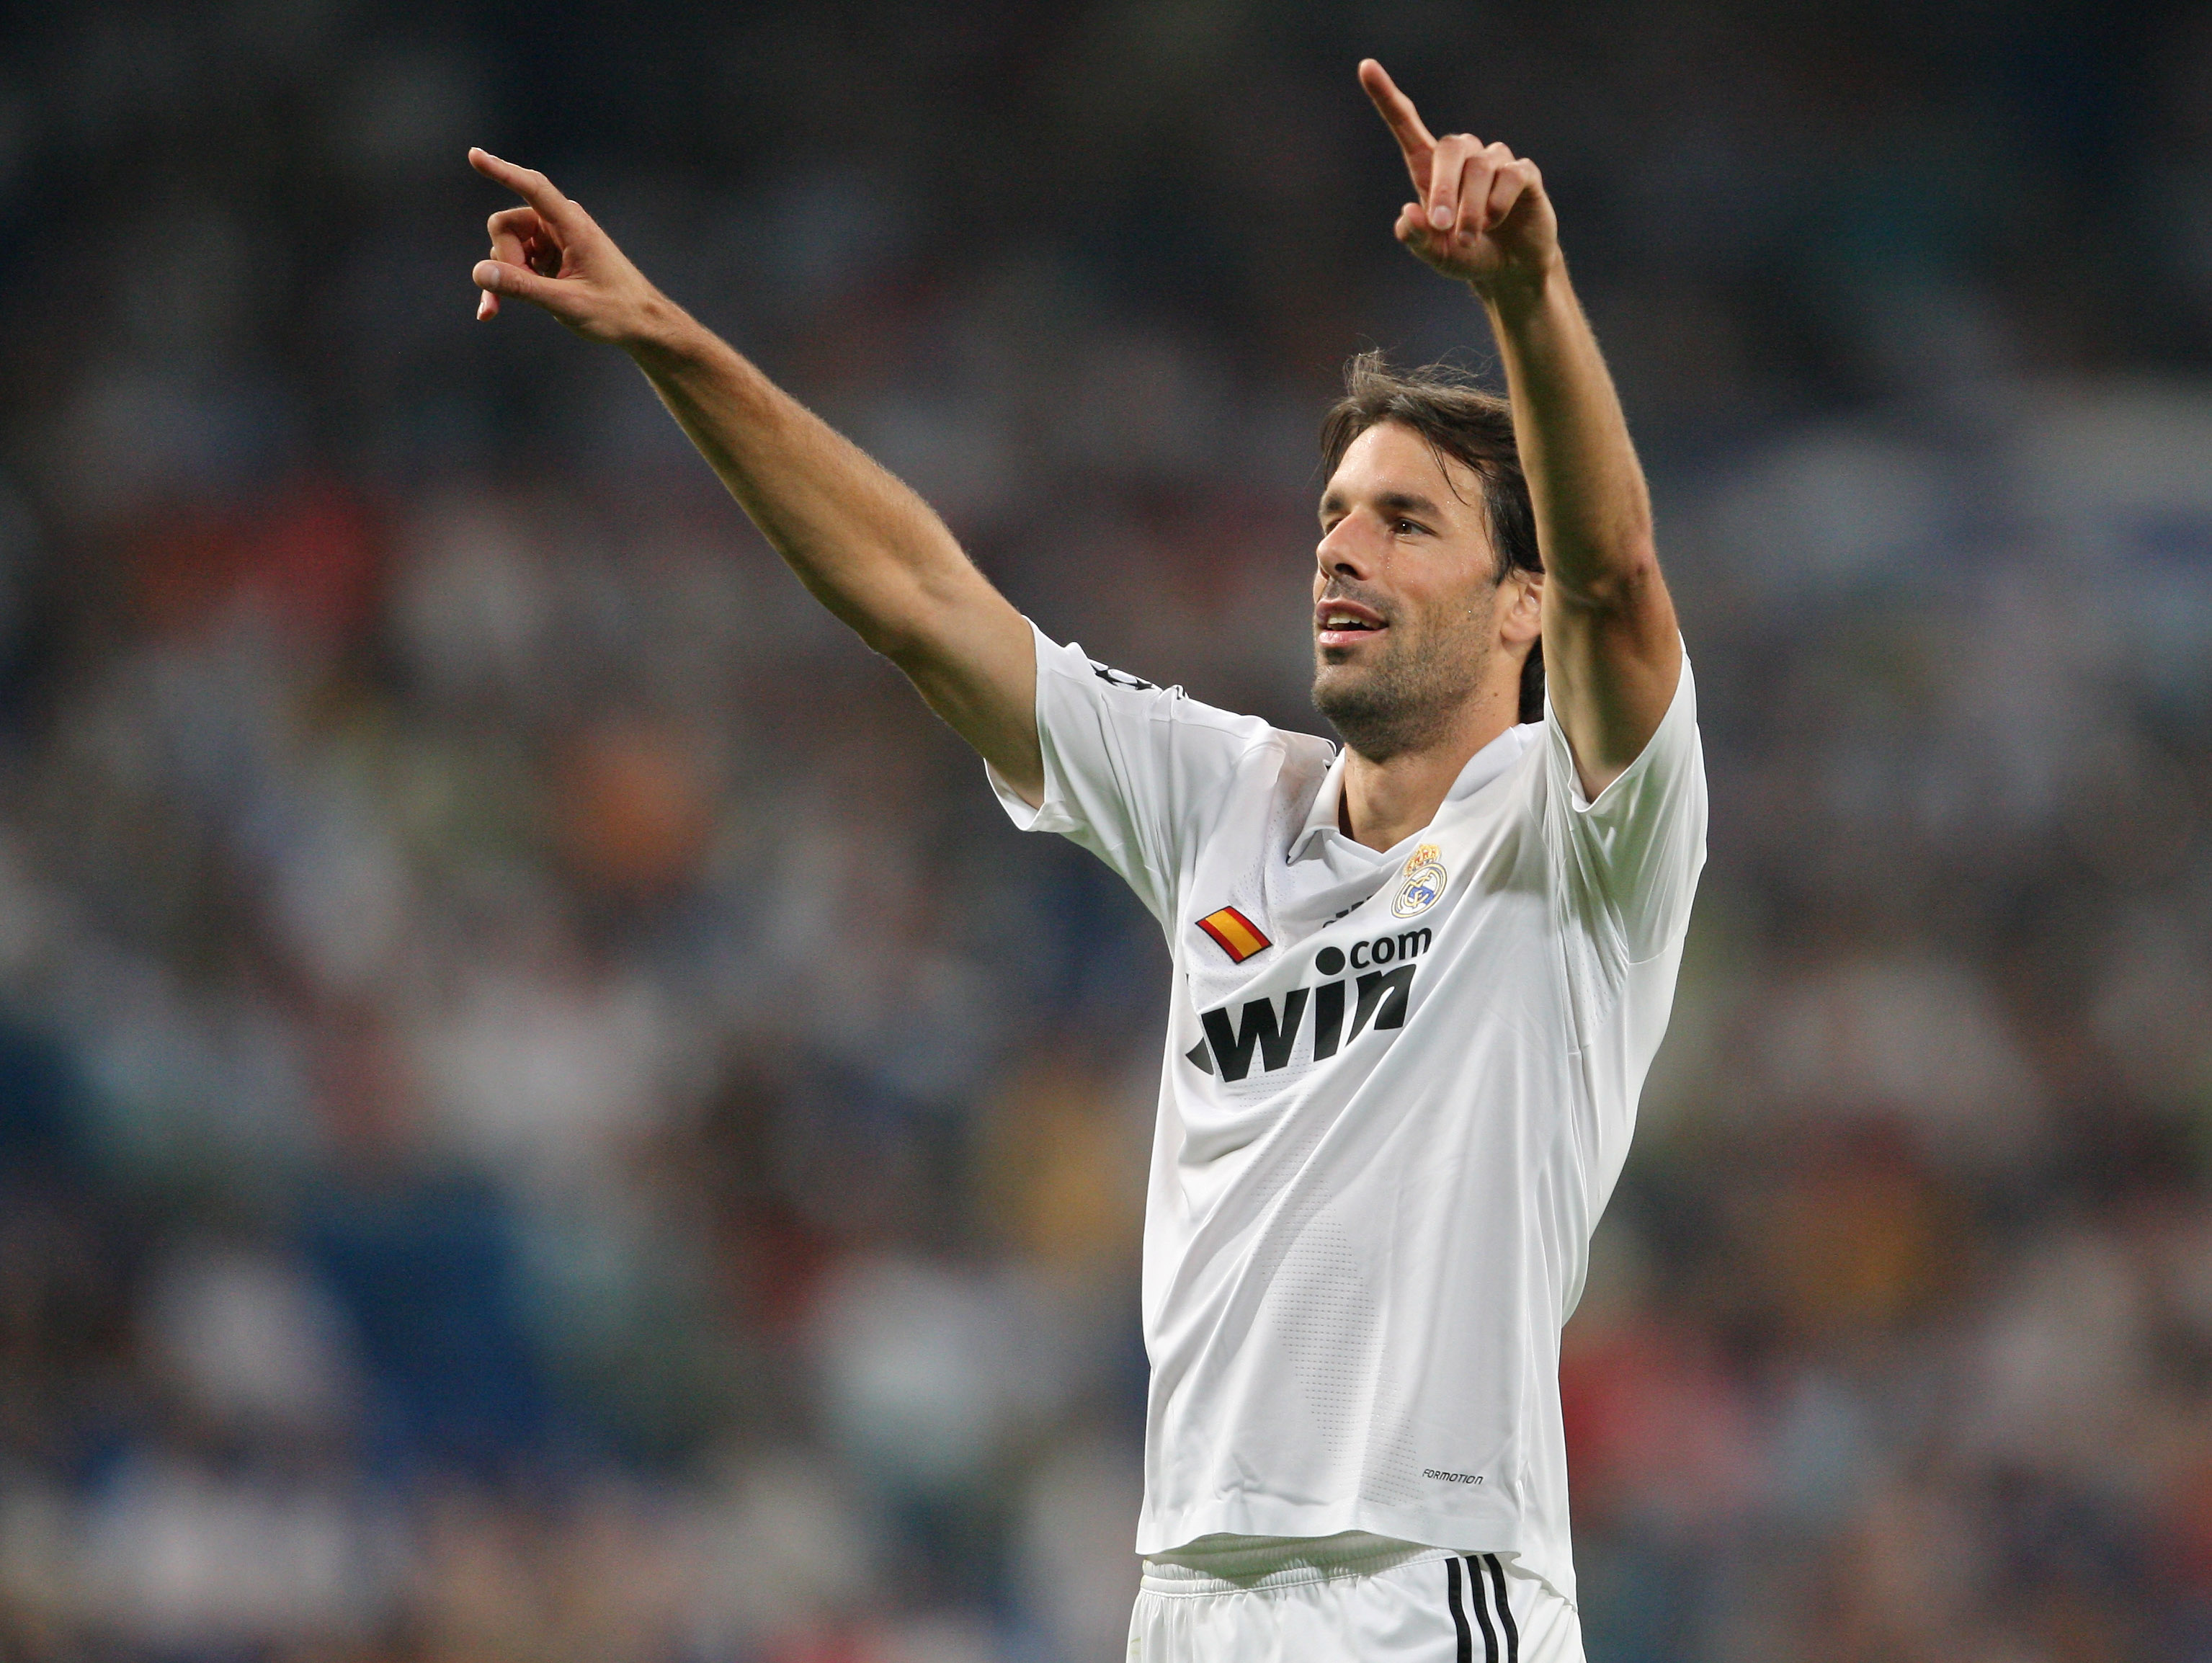 MADRID, SPAIN - SEPTEMBER 17:  Ruud van Nistelrooy of Real Madrid celebrates scoring the second goal during the UEFA Champions League Group H match between Real Madrid and BATE Borisov at the Santiago Bernabeu stadium on September 17, 2008 in Madrid, Spai